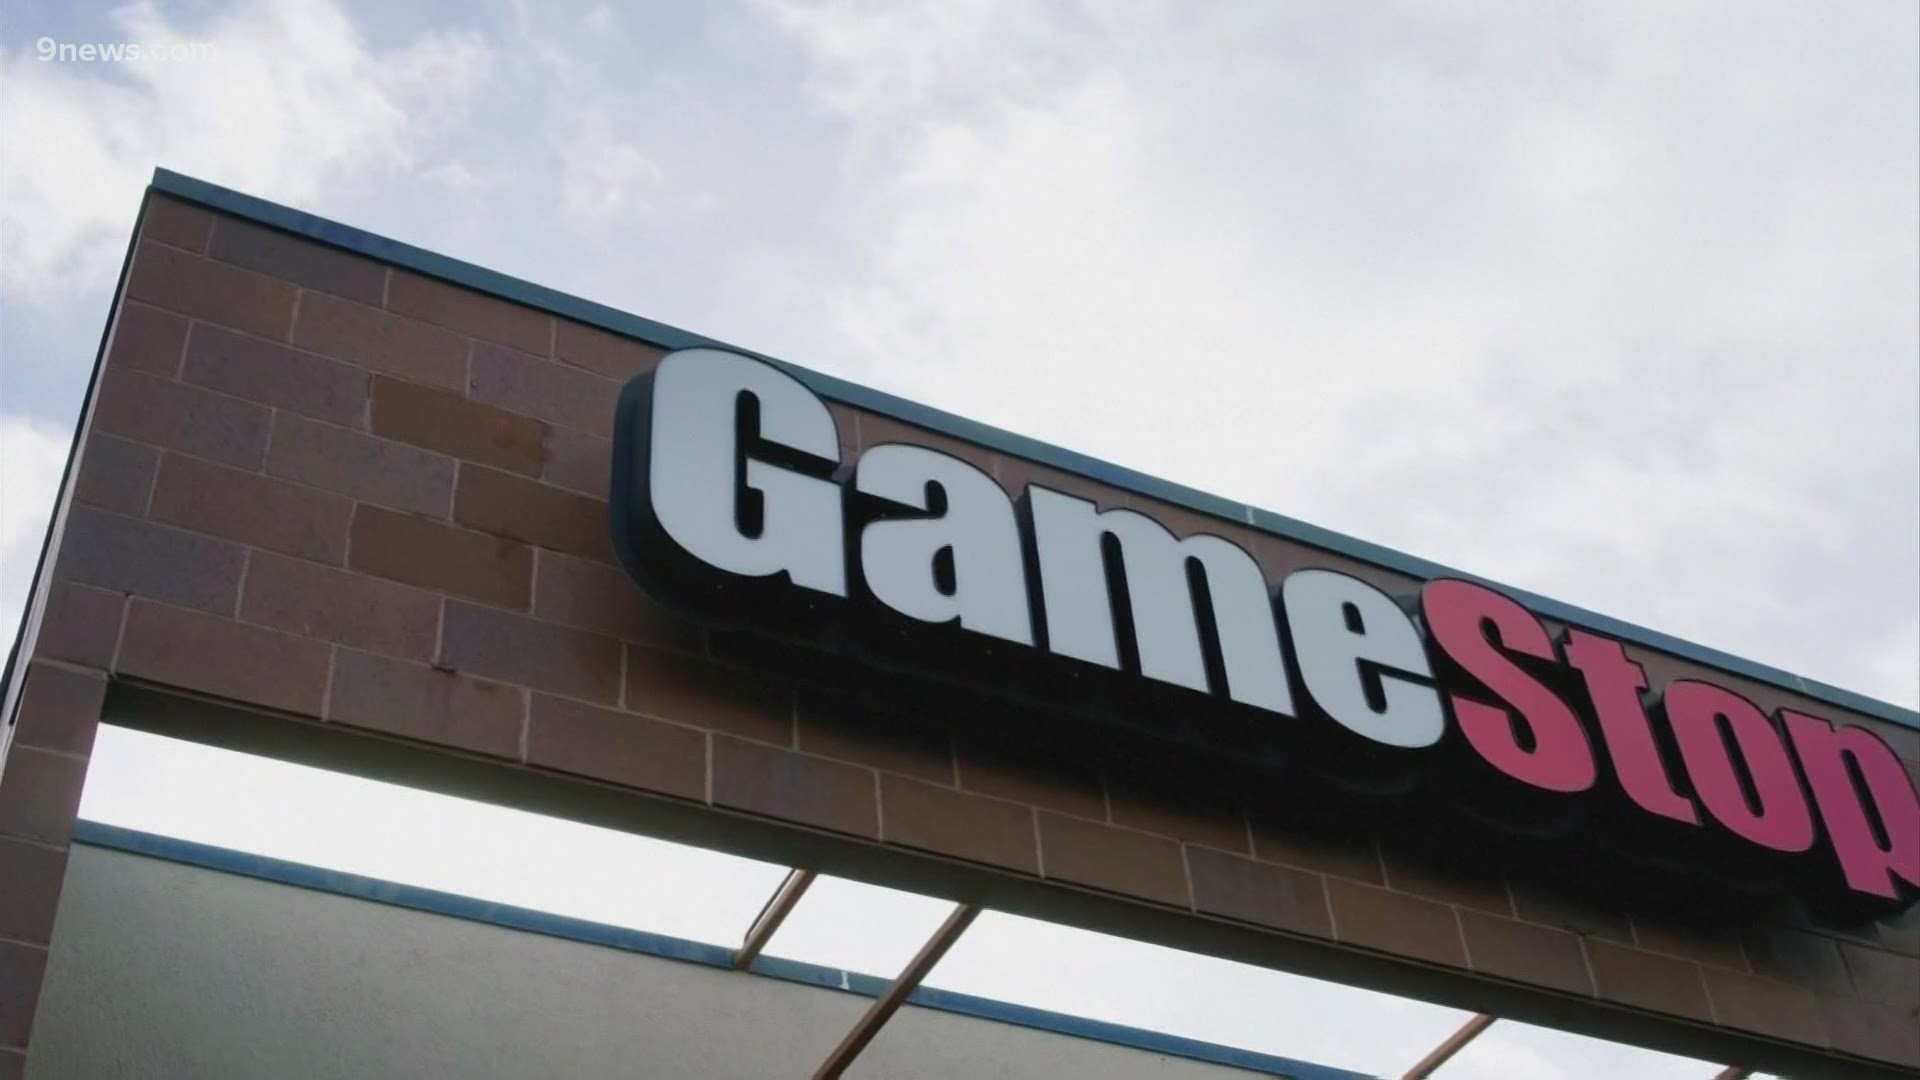 The Wall Street frenzy over GameStop began when an army of smaller-pocketed investors on Reddit started throwing dollars and buy orders at the stock.